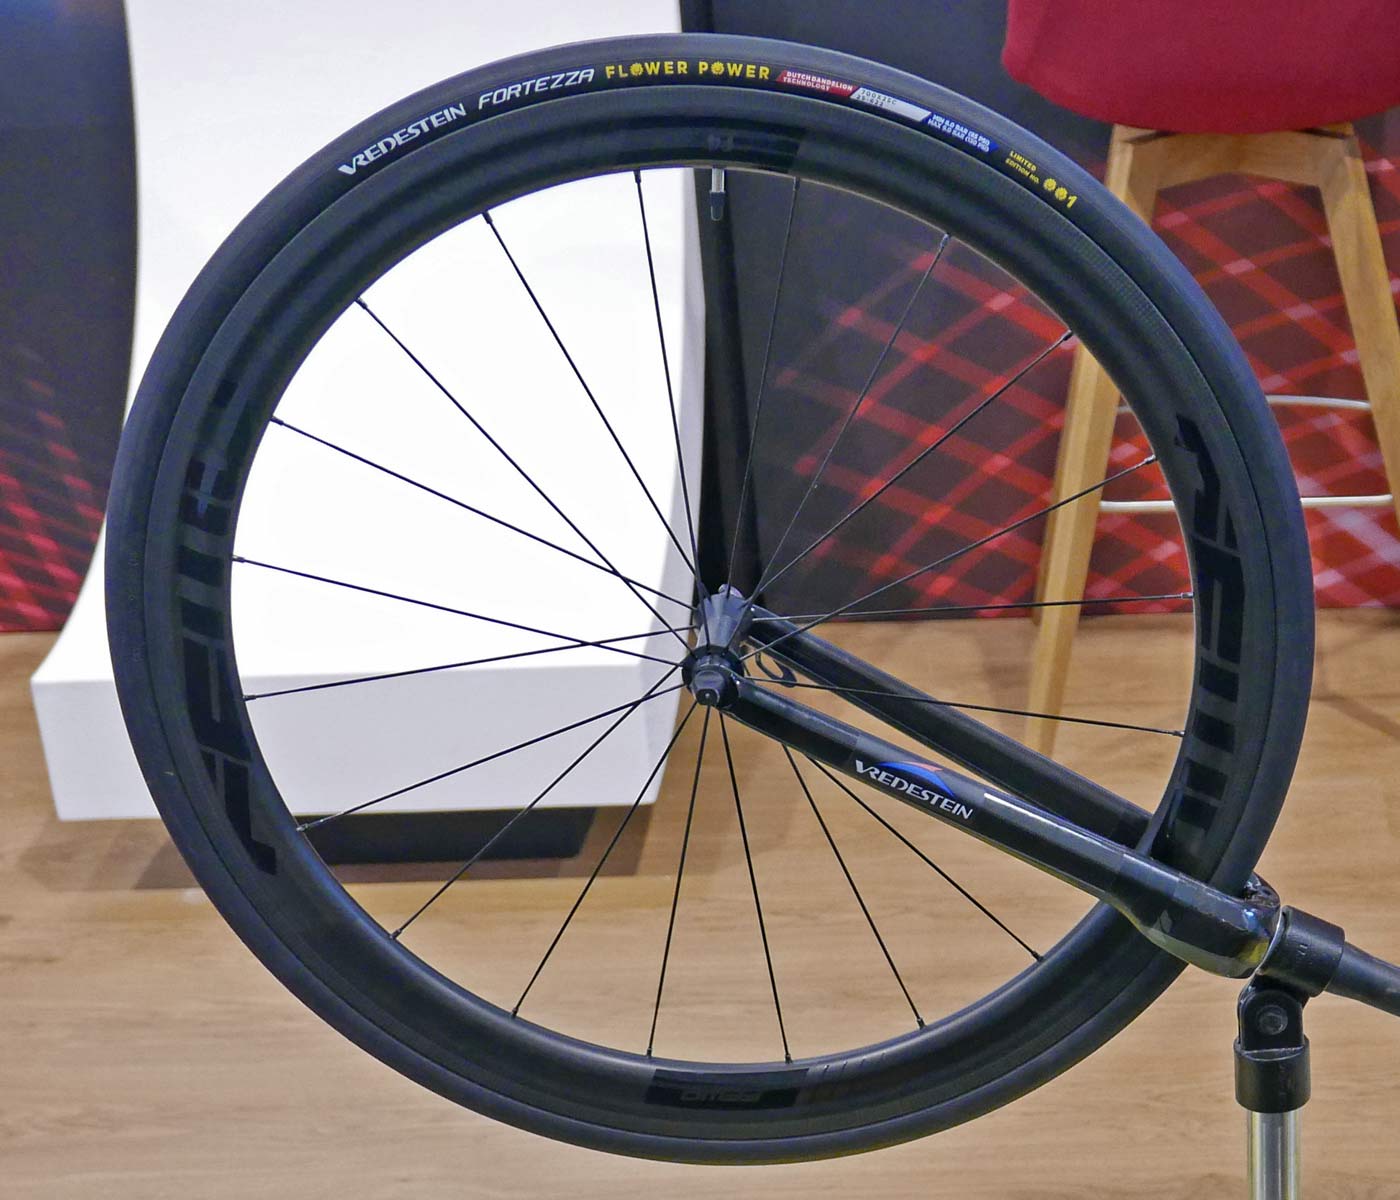 Vredestein Fortezza Flower Power tires, limited edition numbered sustainable dandelion rubber road tires